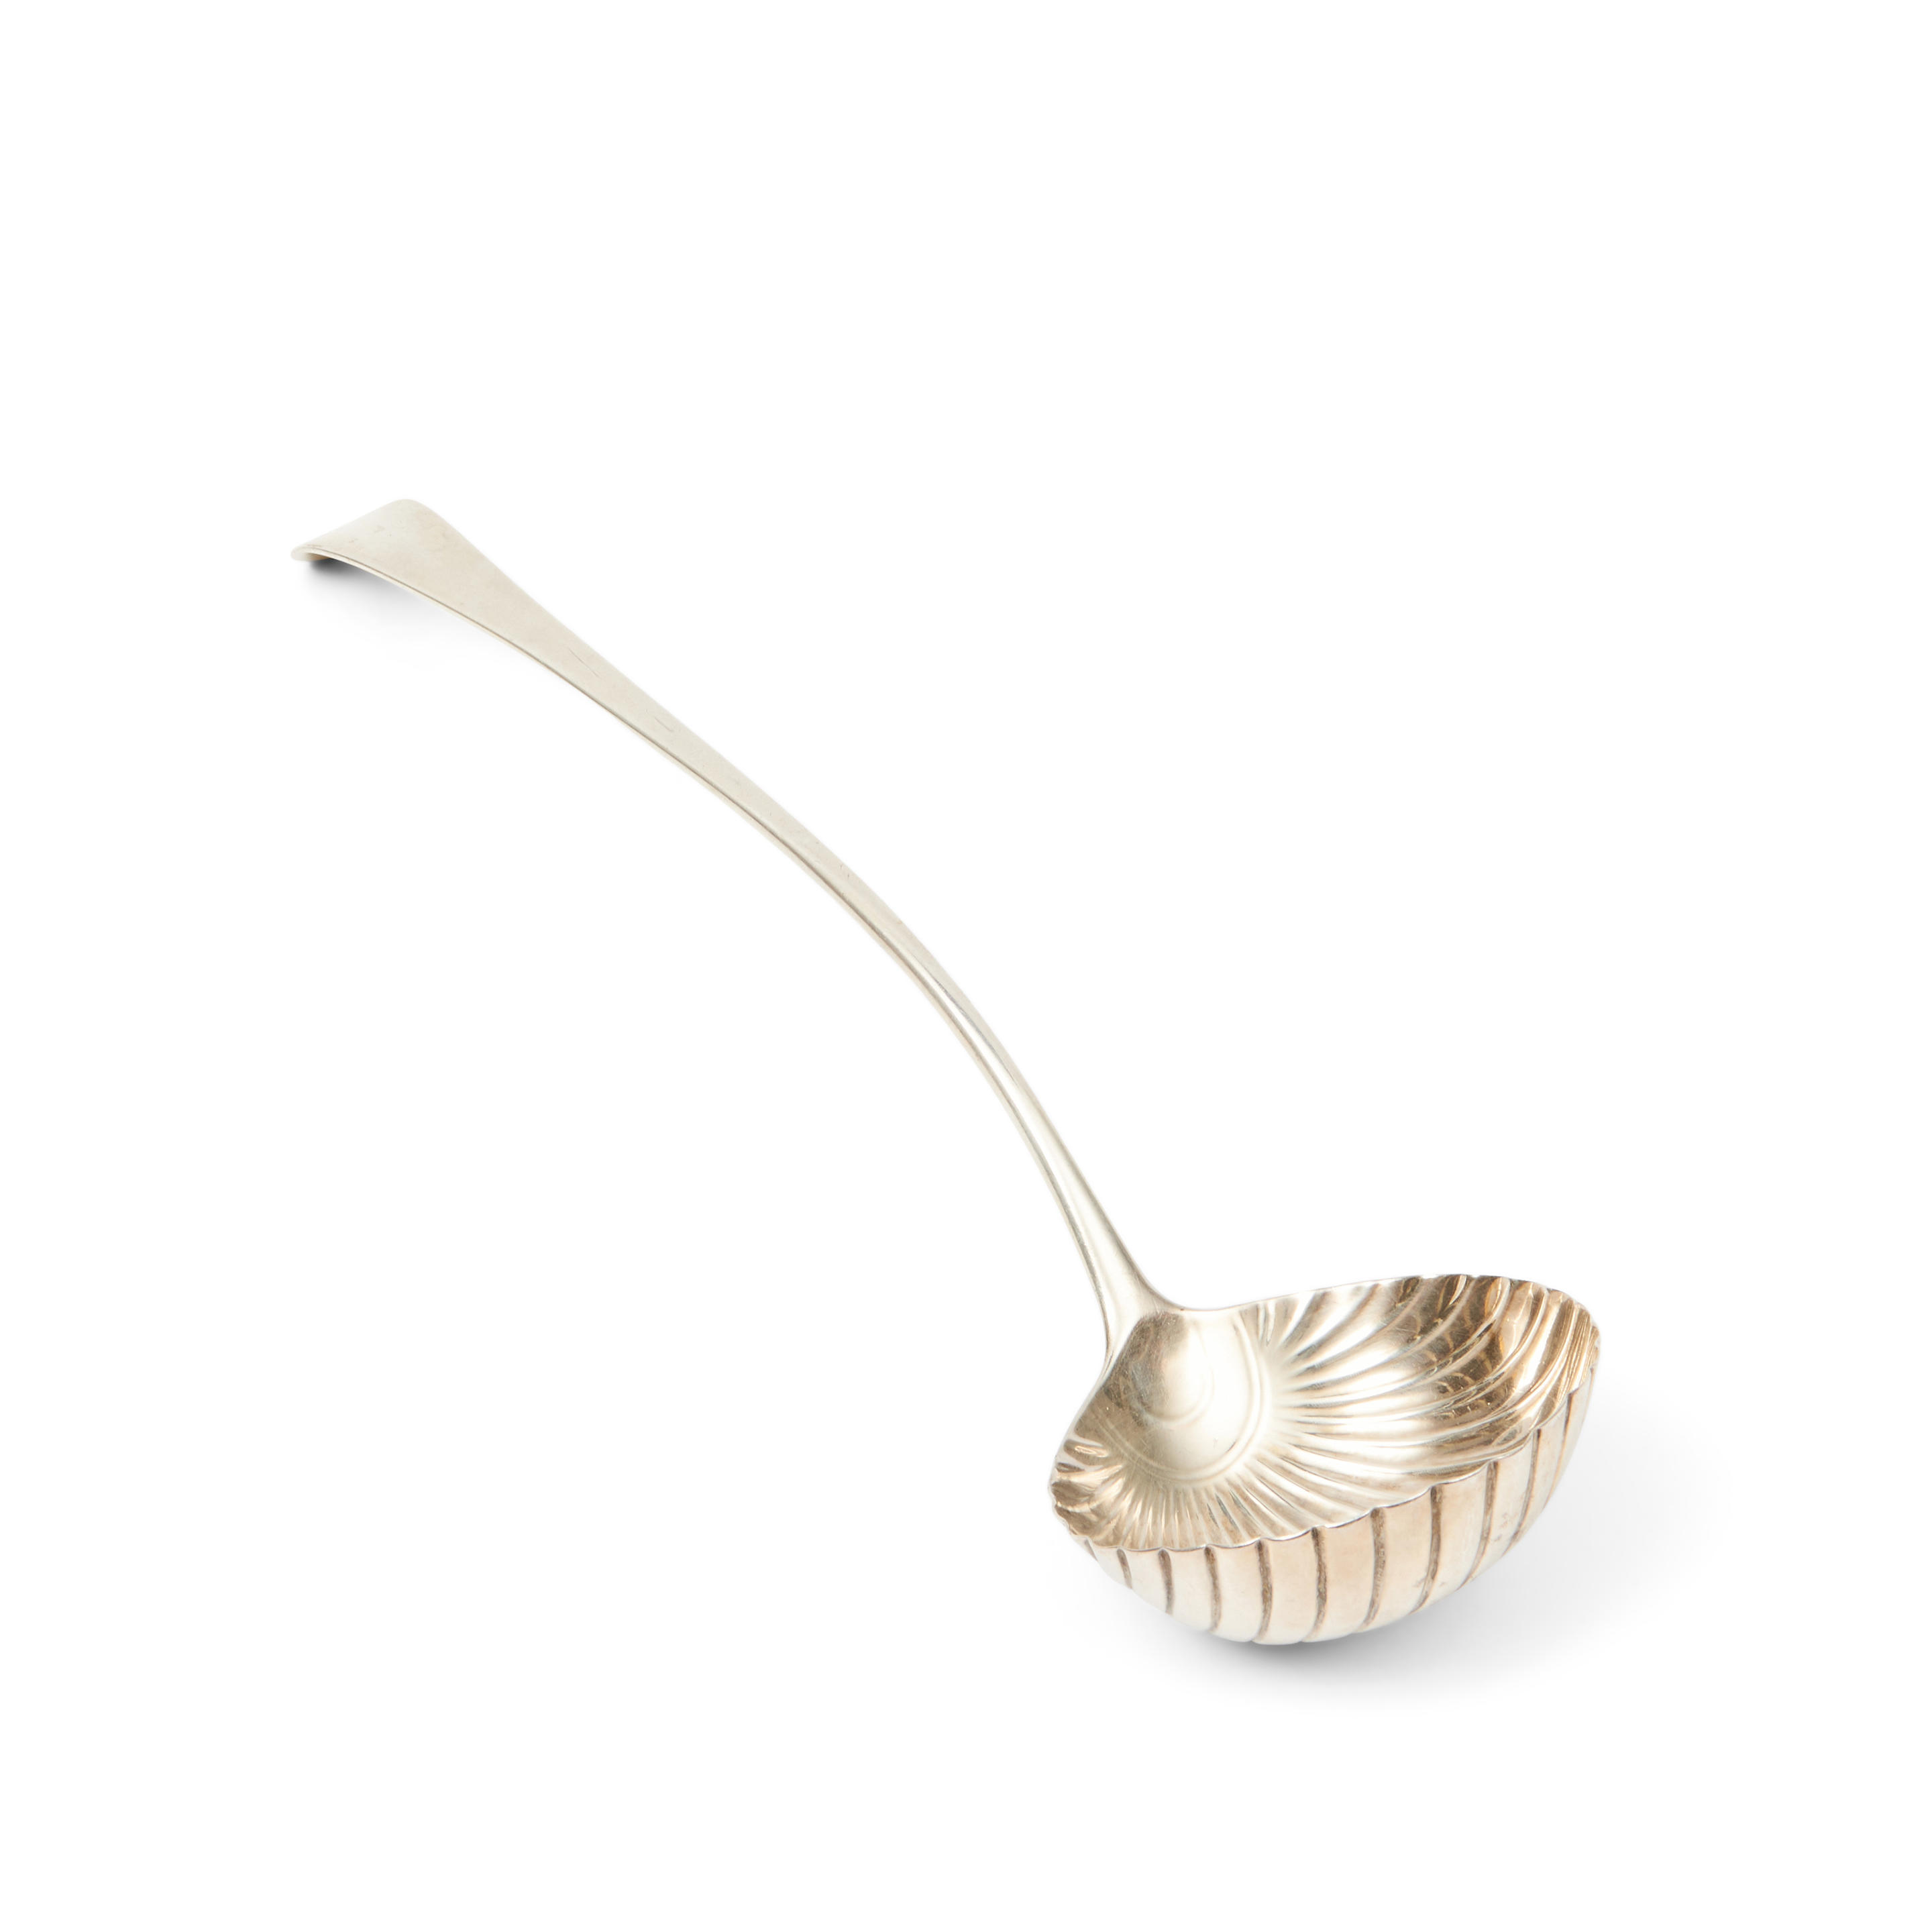 ENGLISH STERLING SILVER LADLE with